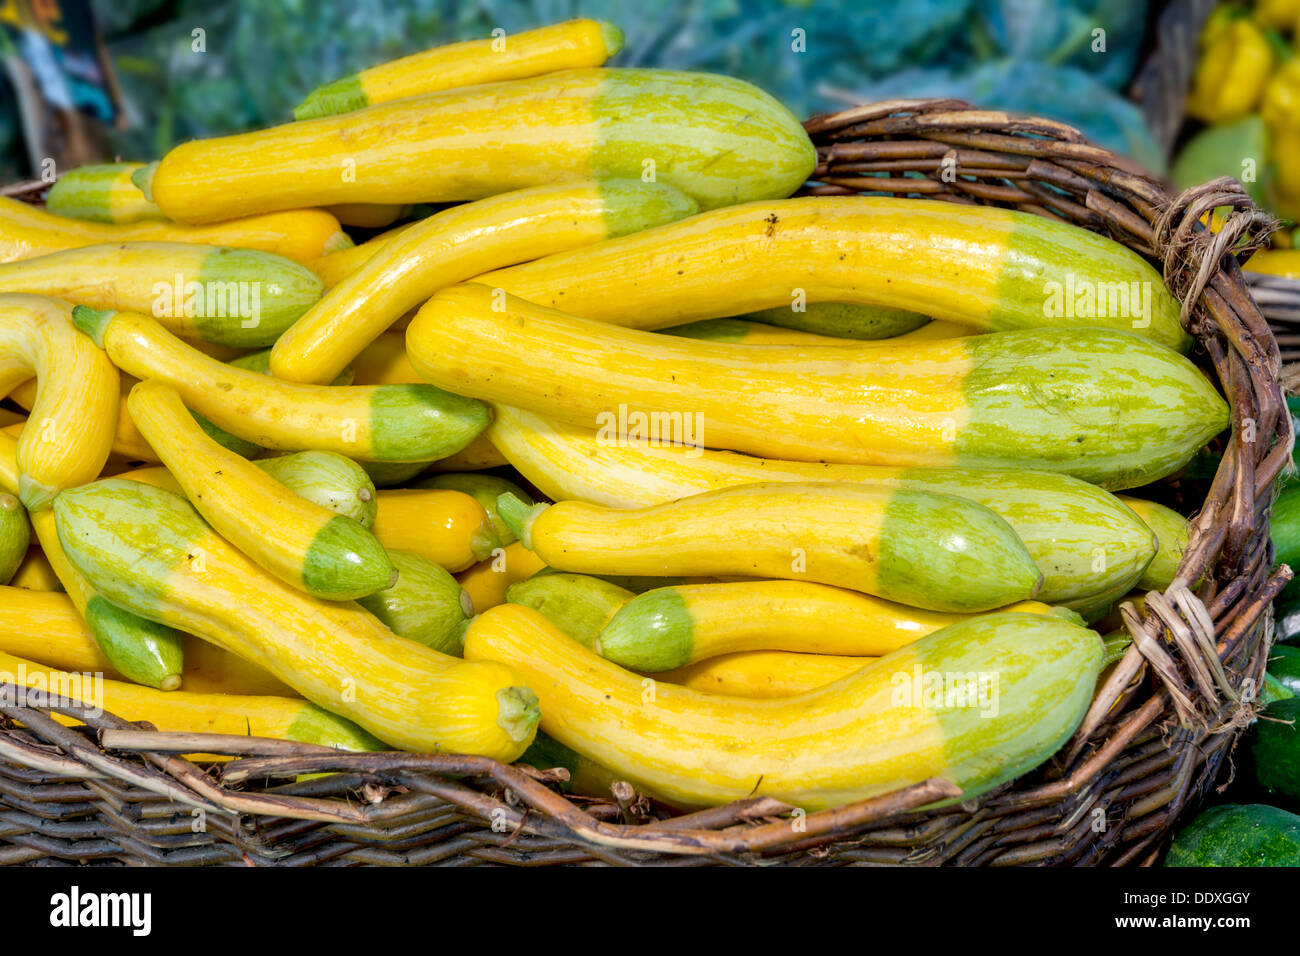 Many yellow vegetables in a basket at a market Stock Photo